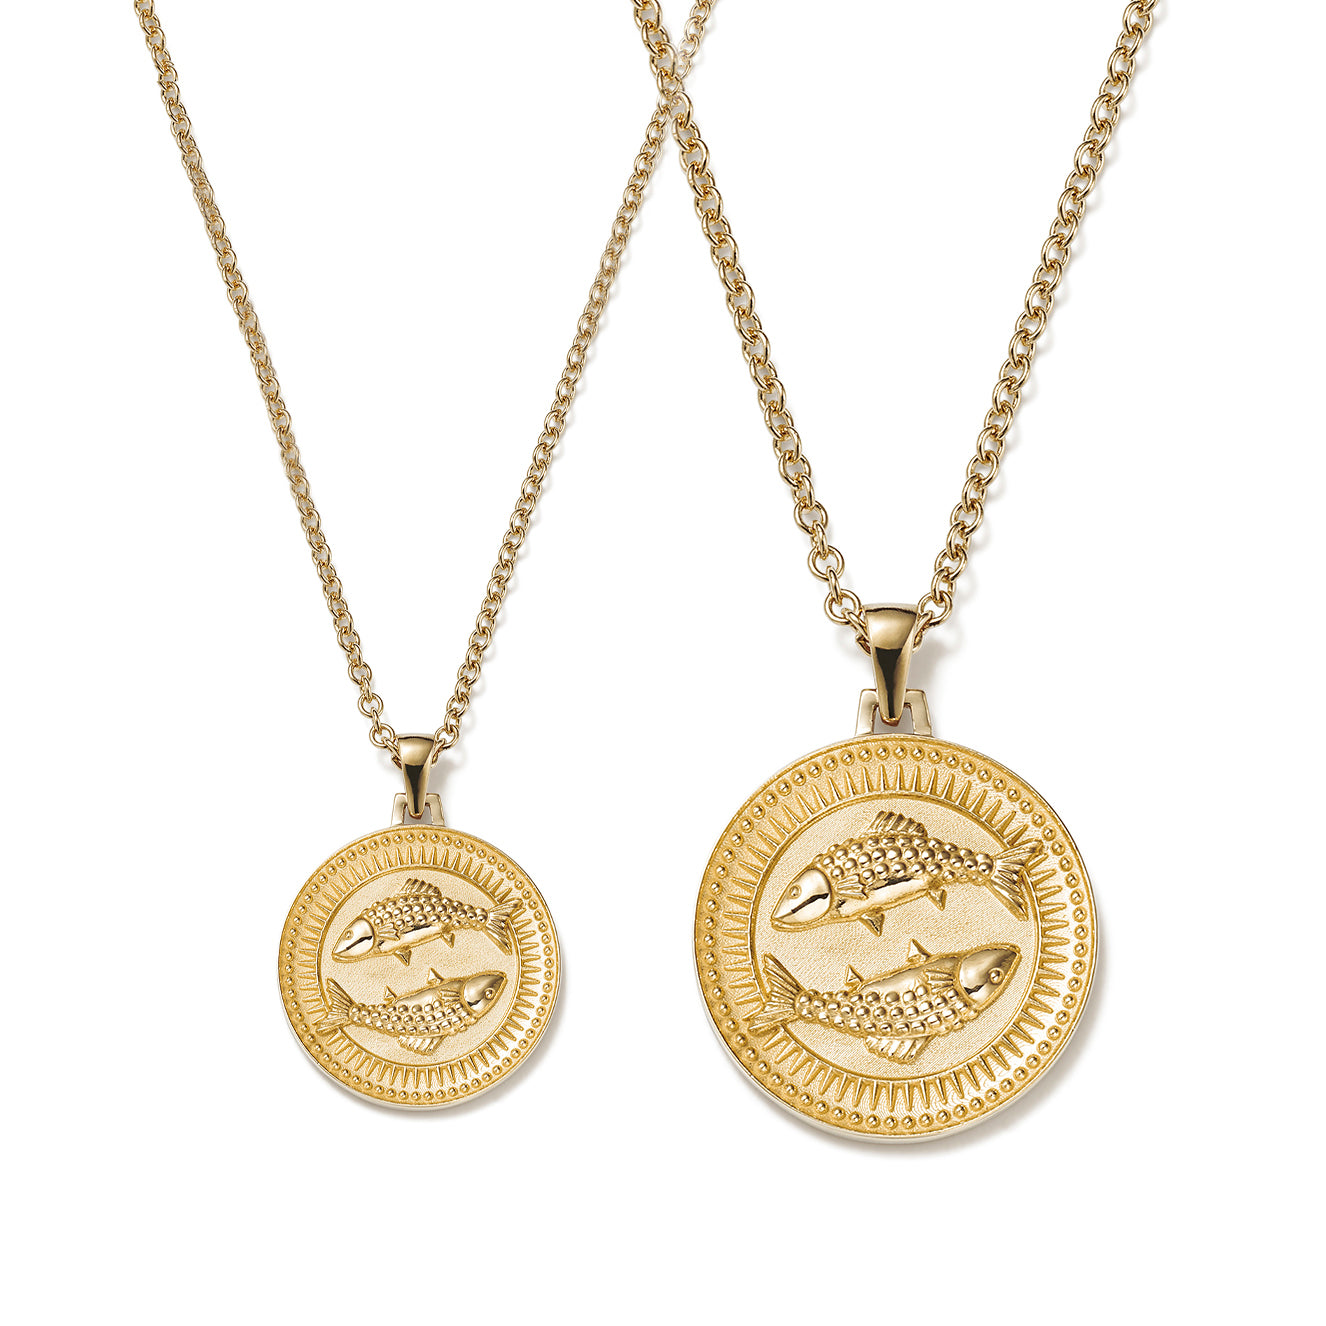 Small and Large Ethical Gold Pisces Pendant Necklaces Side By Side on a White Background